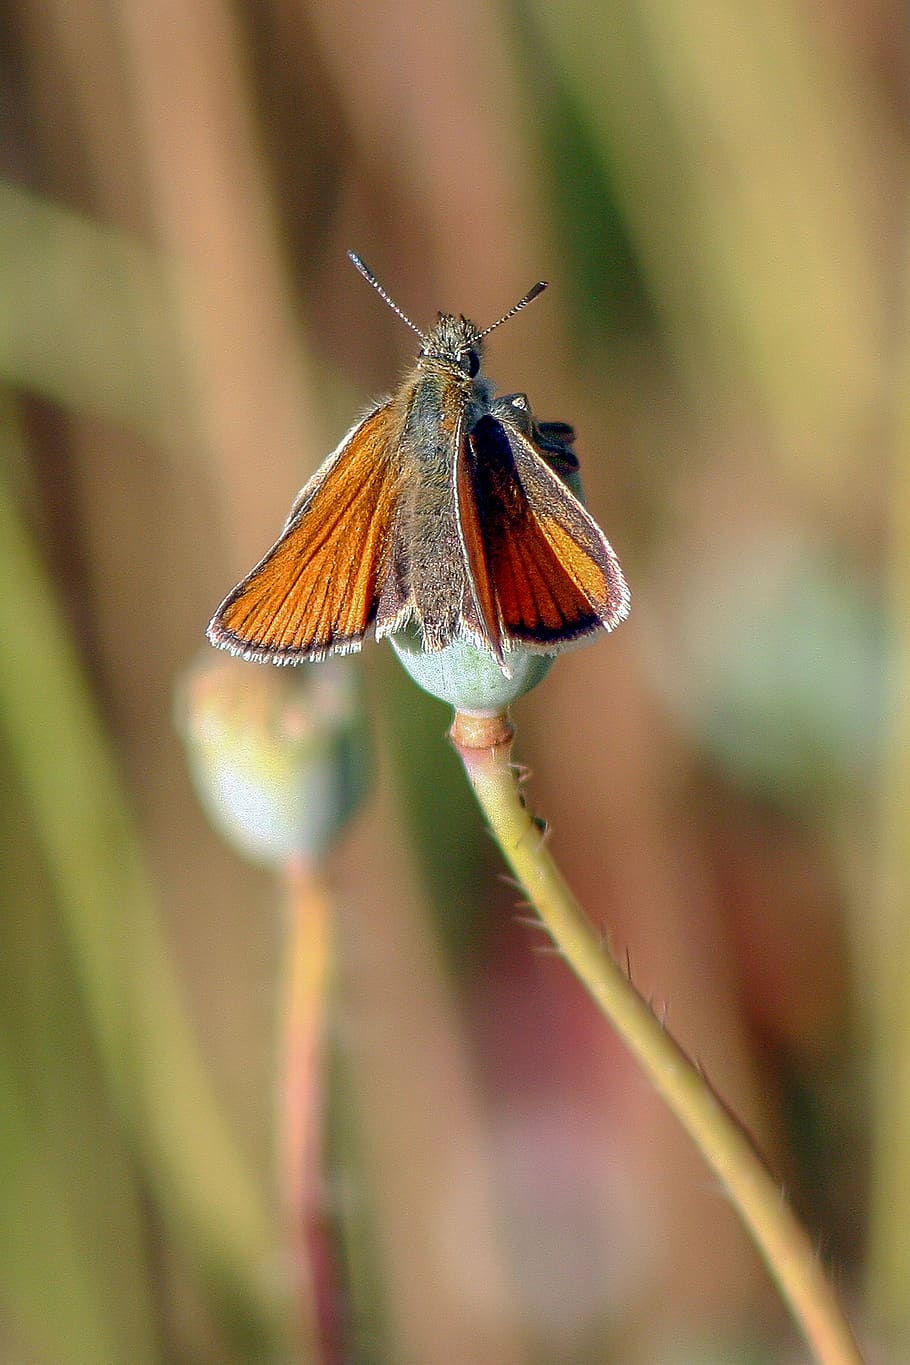 small skipper, butterfly, wings, insect, nature, wing, summer, spring, colorful, flower